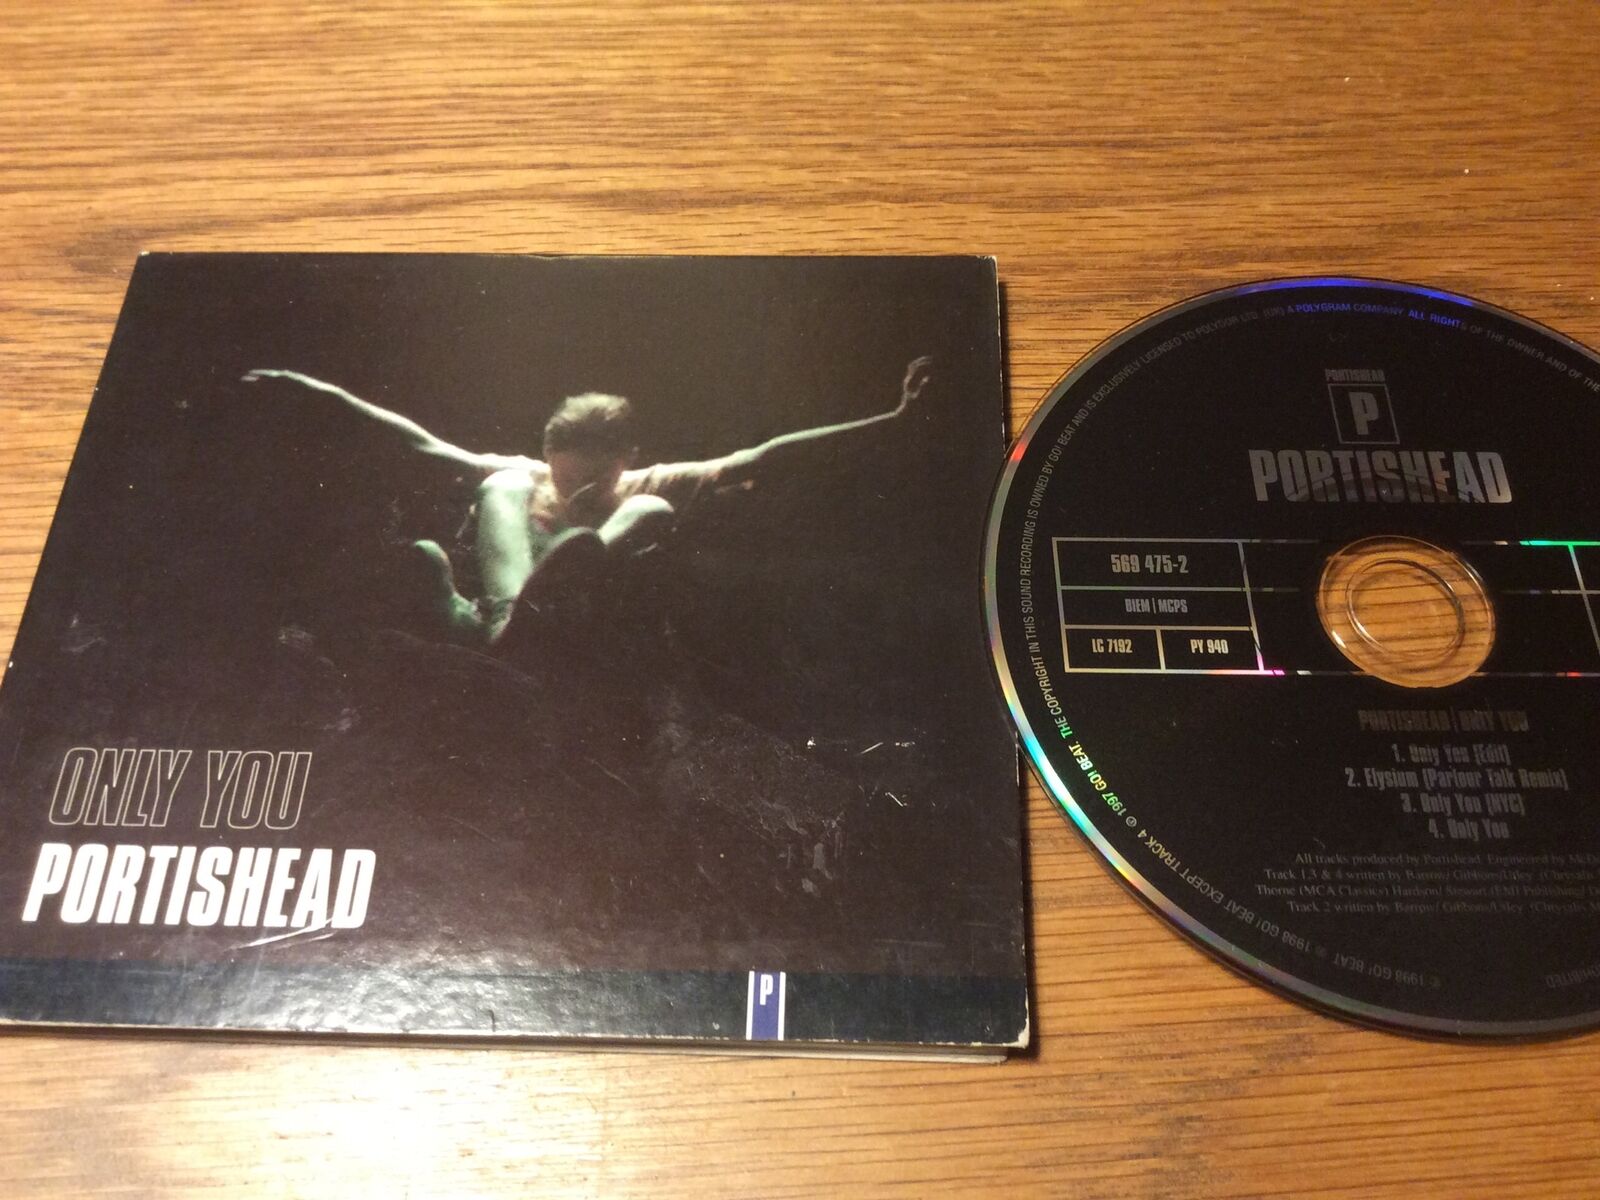 Portishead - Only You 4-track cd single (Go! Beat - 1998)